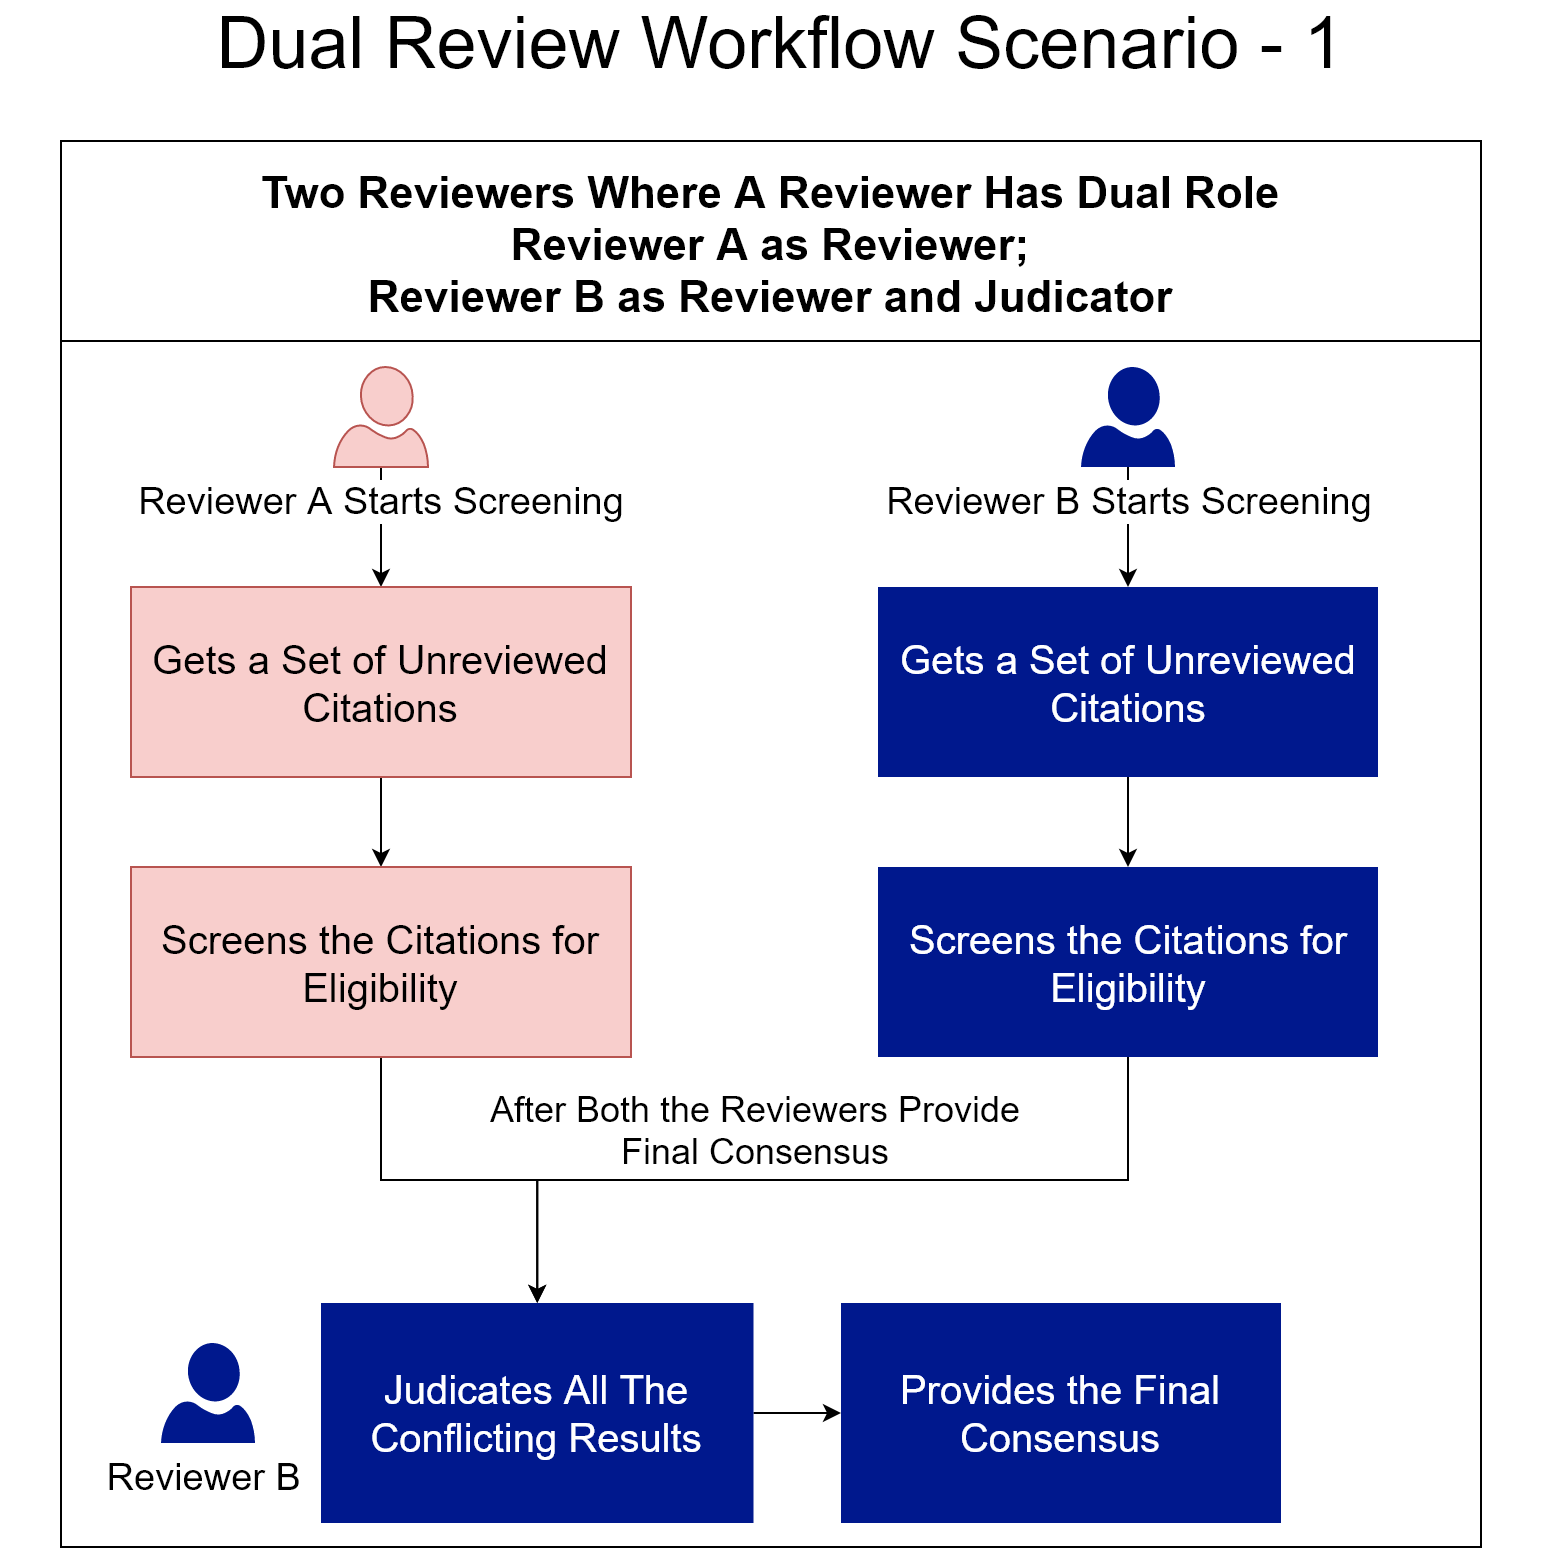 Dual Review Workflow